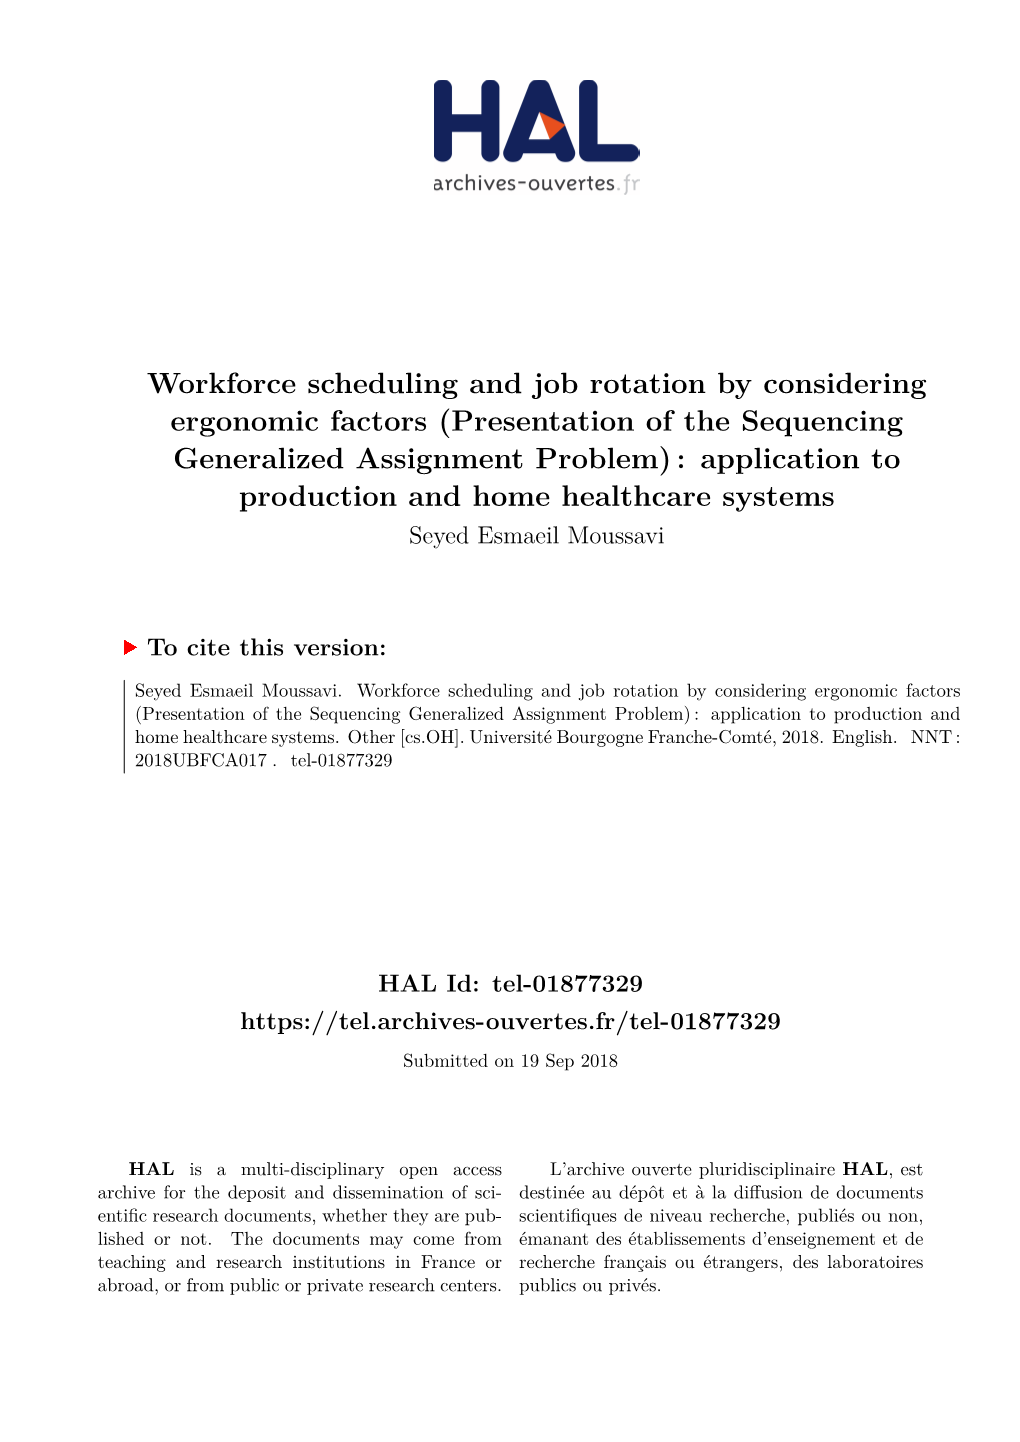 Workforce Scheduling and Job Rotation by Considering Ergonomic Factors